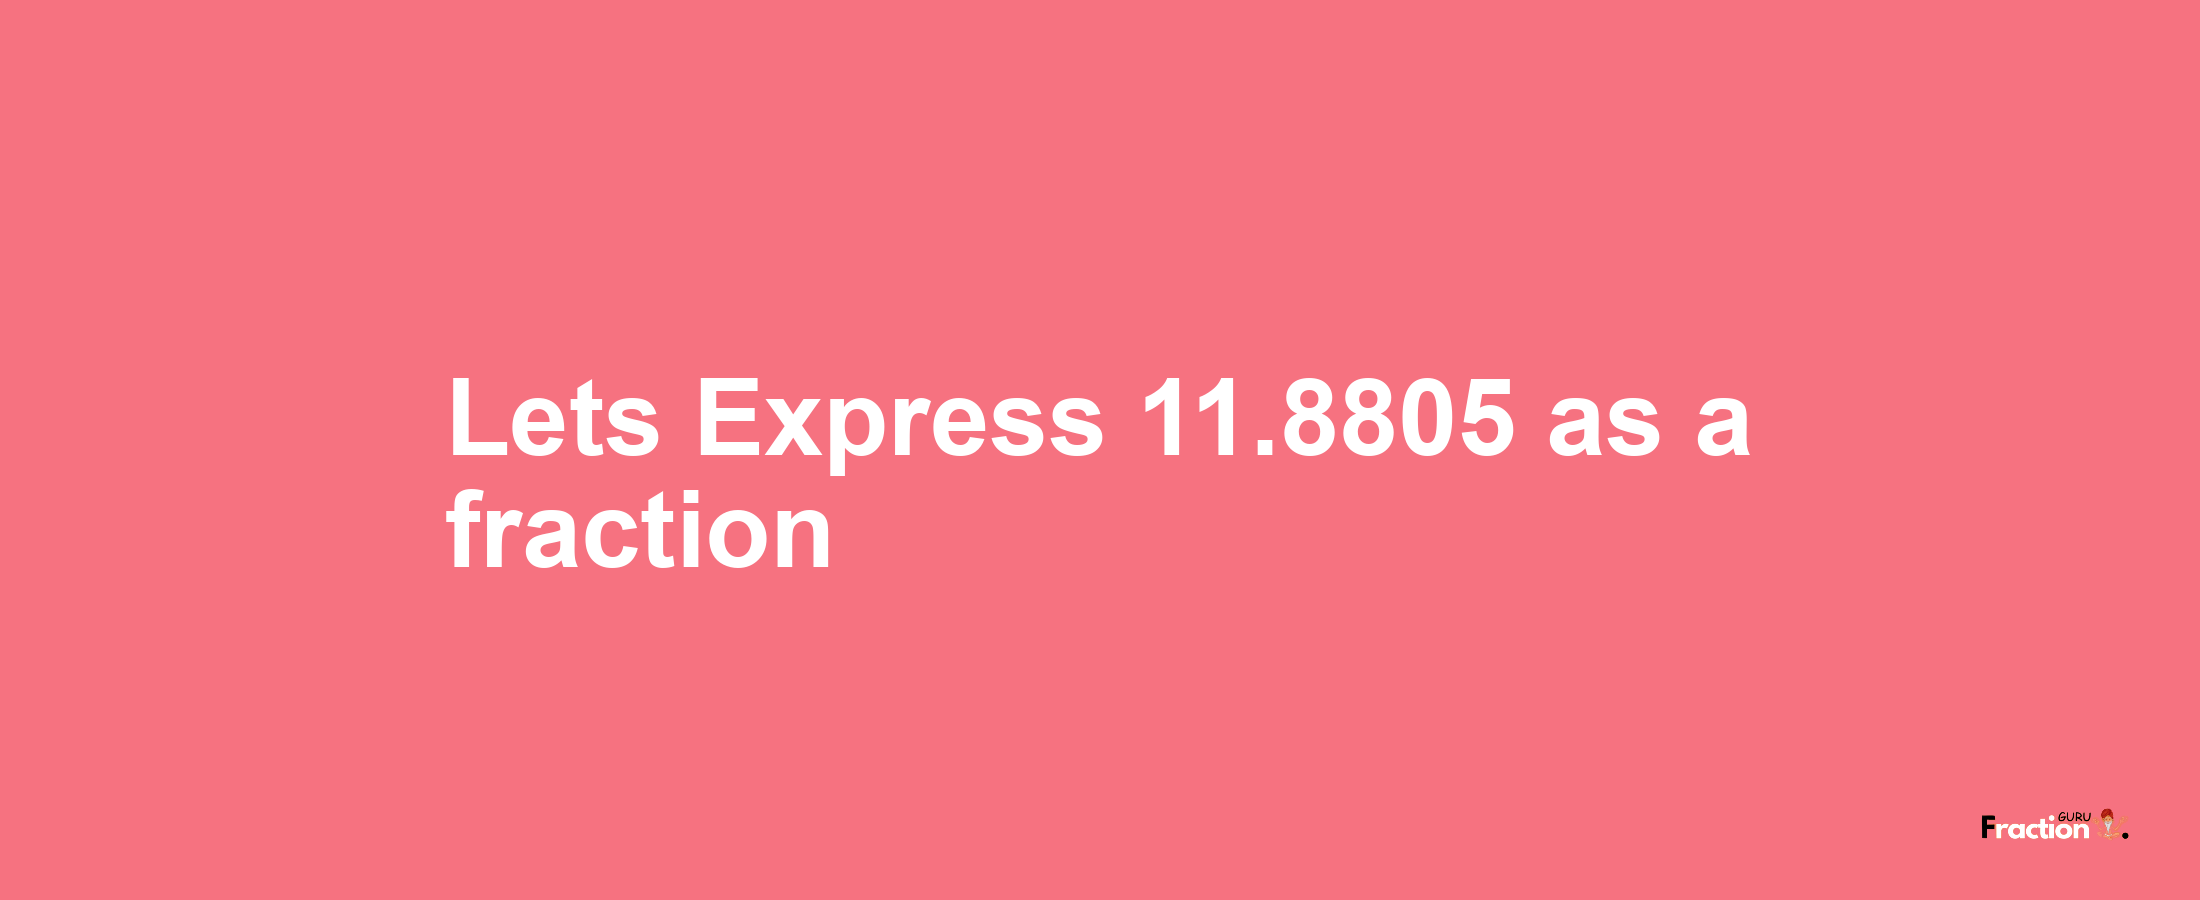 Lets Express 11.8805 as afraction